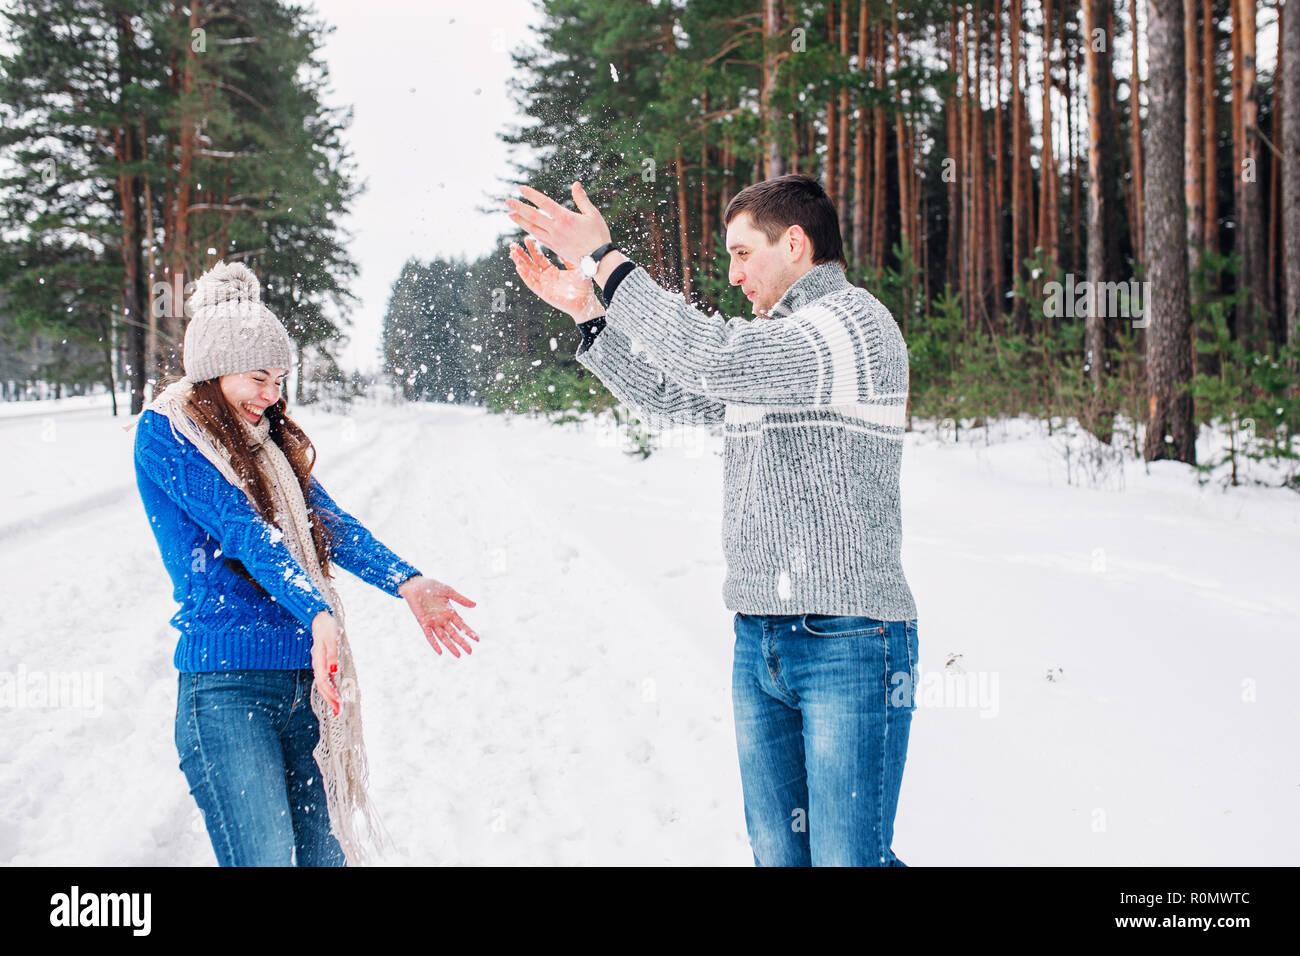 Snowball fight. Winter couple having fun playing in snow forest. Young joyful happy multi-racial couple. Stock Photo